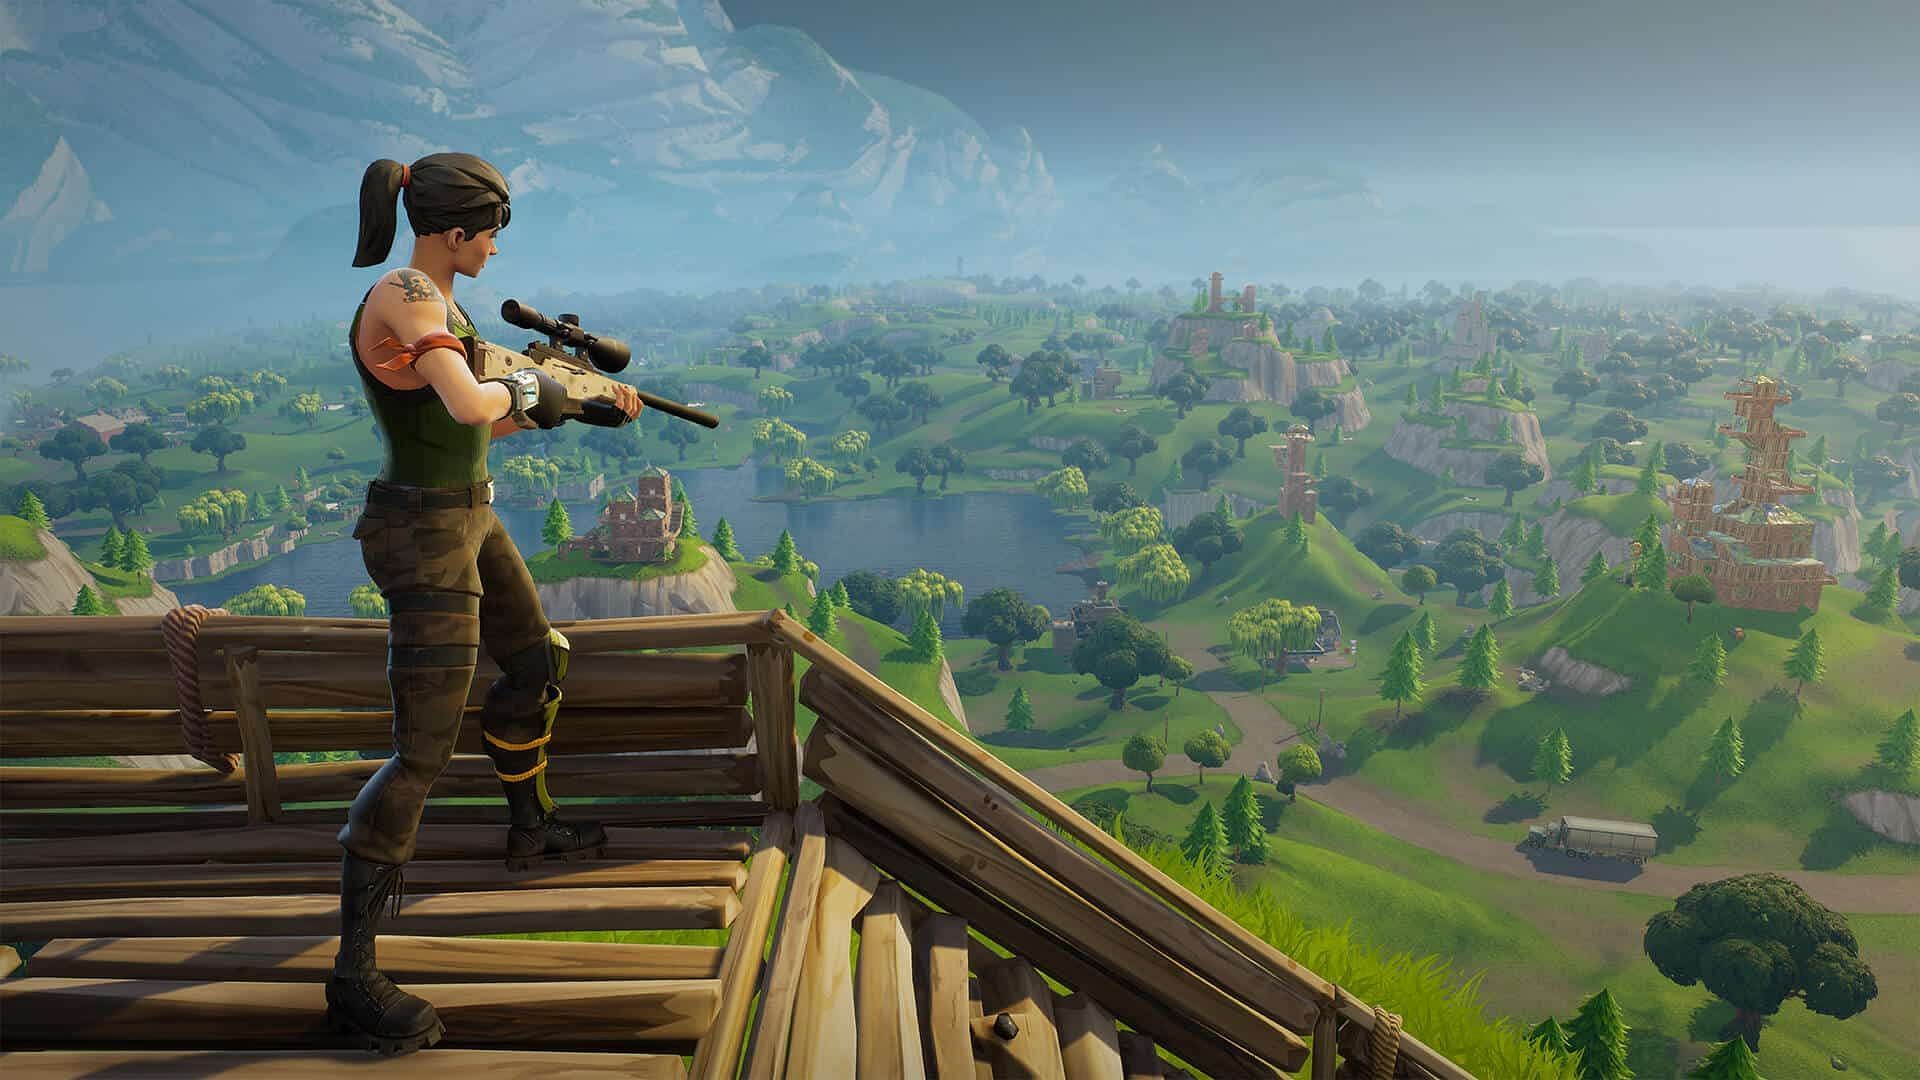 Players who&#039;ve played since the early days of Fortnite have high account levels (Image via Epic Games)